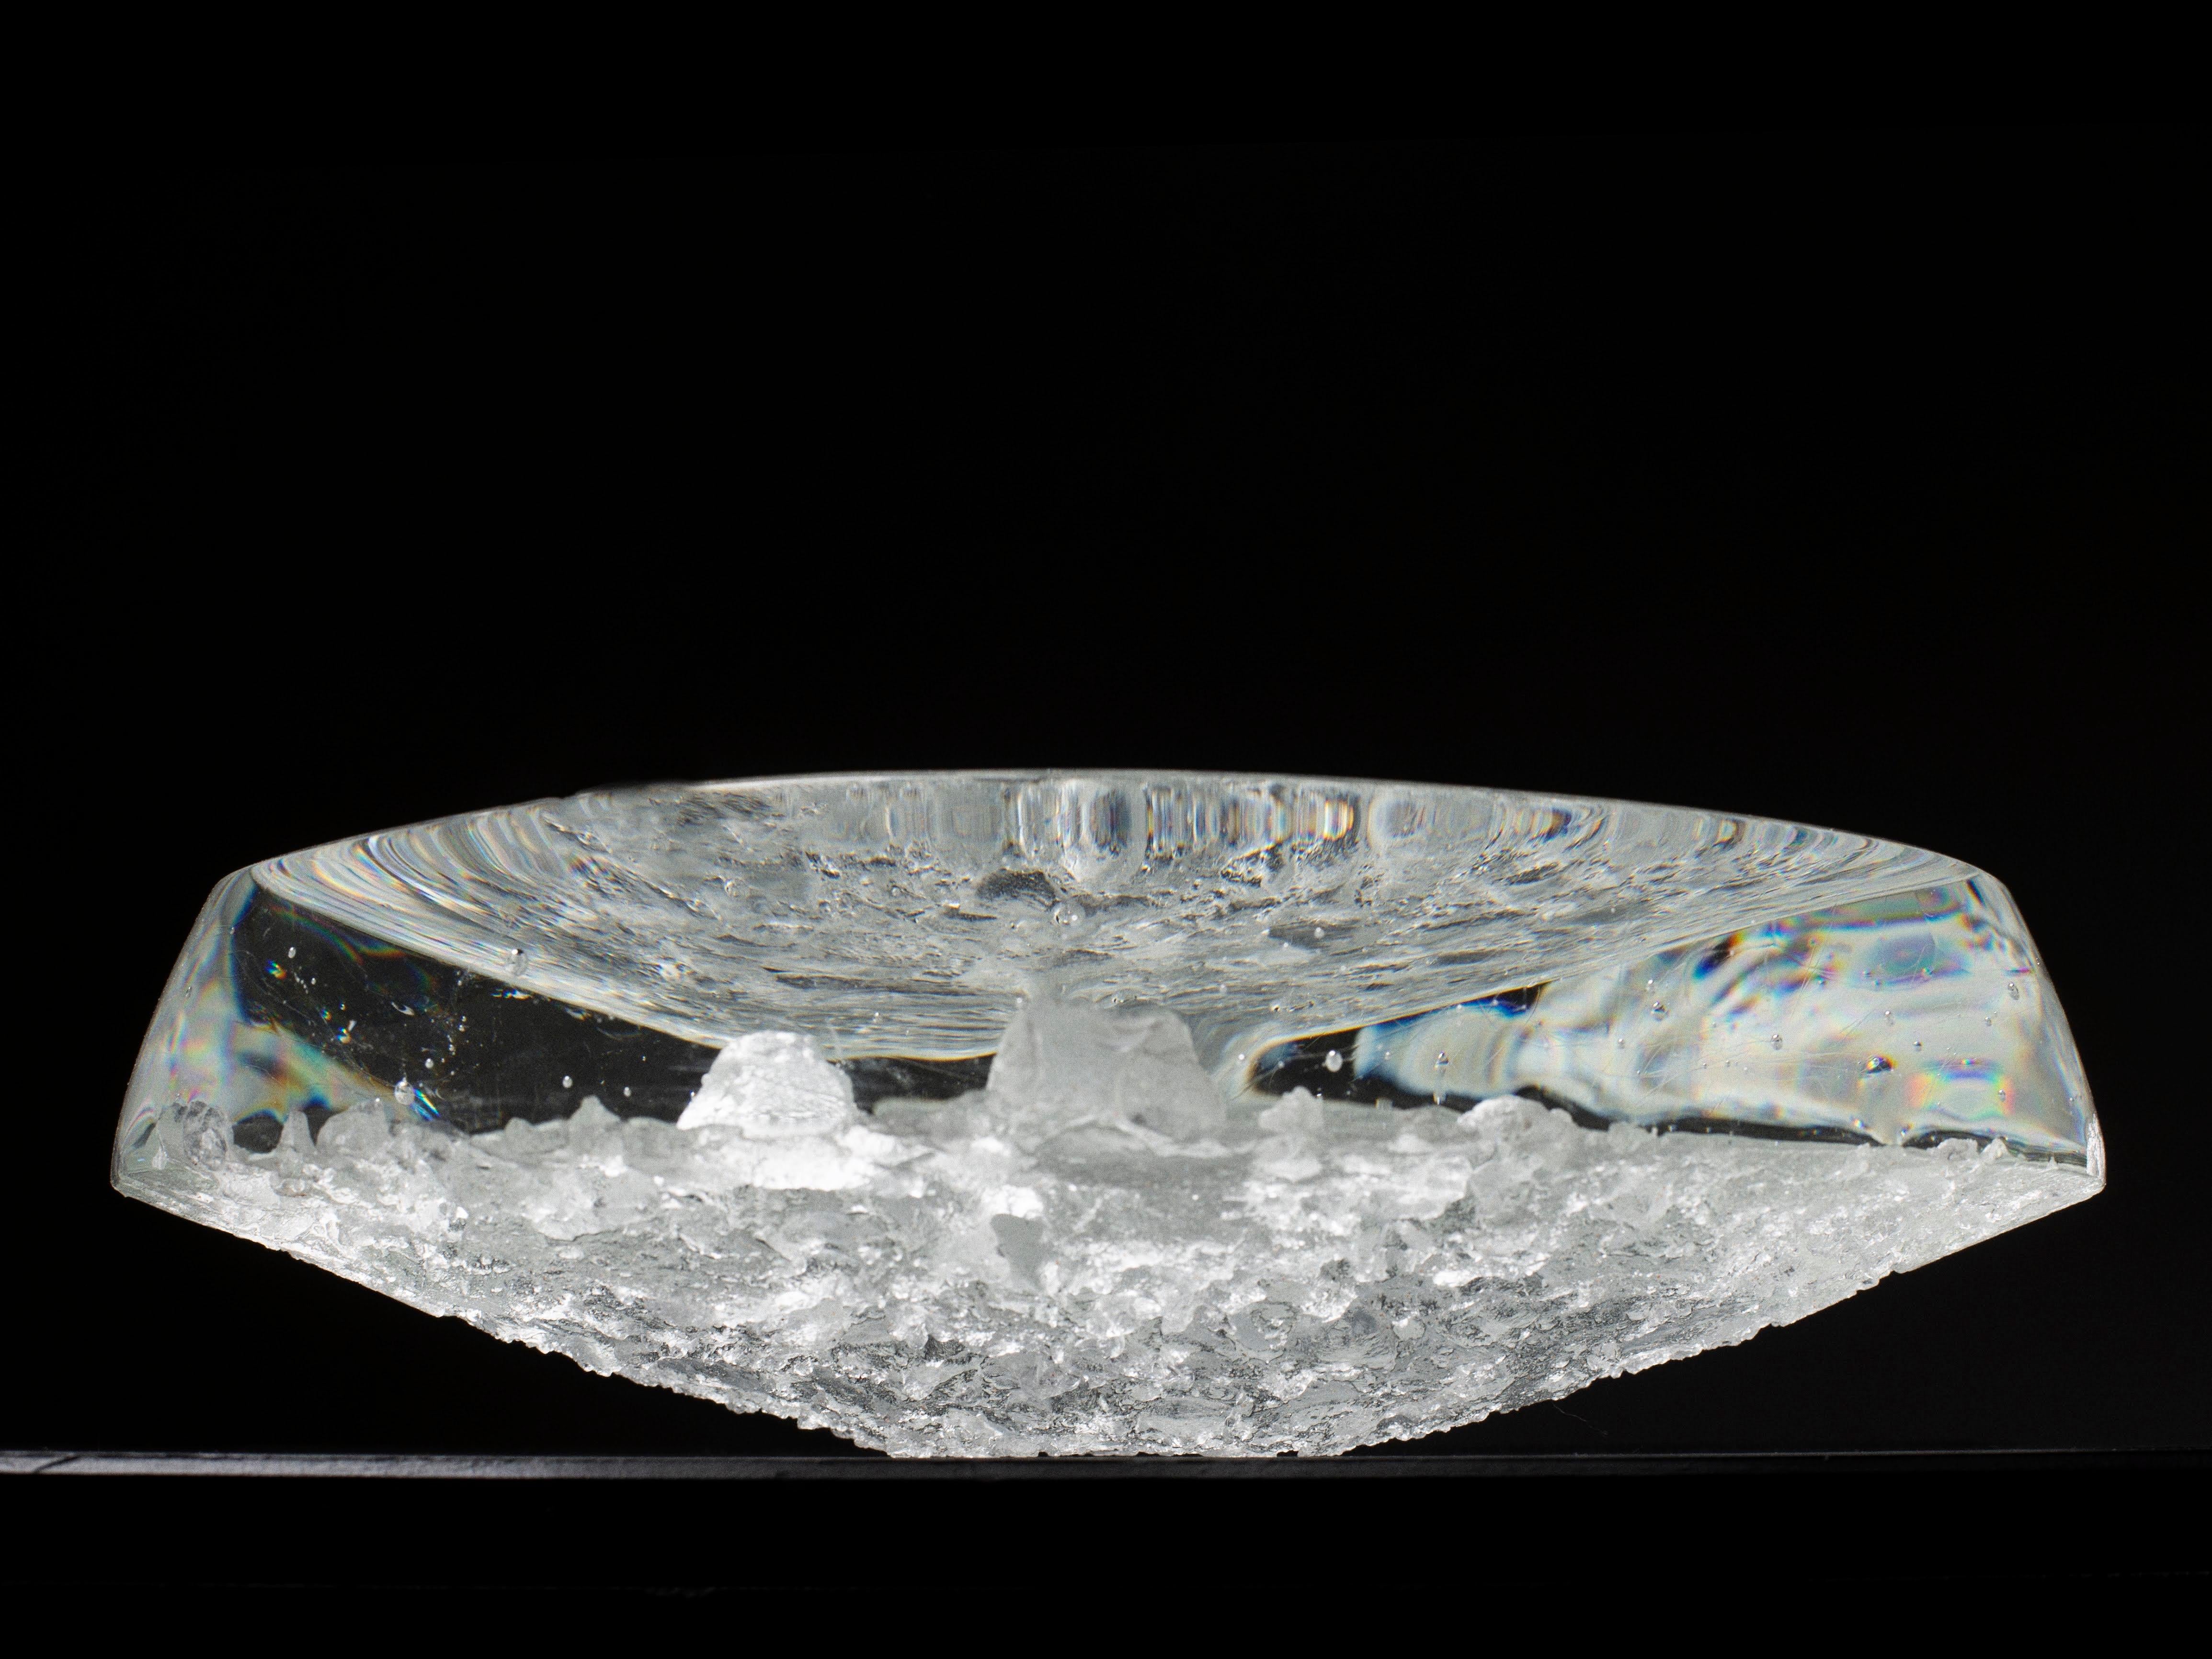 Yugen Round Plate by Matthieu Gicquel
Dimensions: Ø 36 x H 5 cm.
Materials: Optical glass.
Weight: 12 kg.

Each piece is numbered. Please contact us.

Praise for the moment
Light shines through the glass. Details are revealed one by one: here a